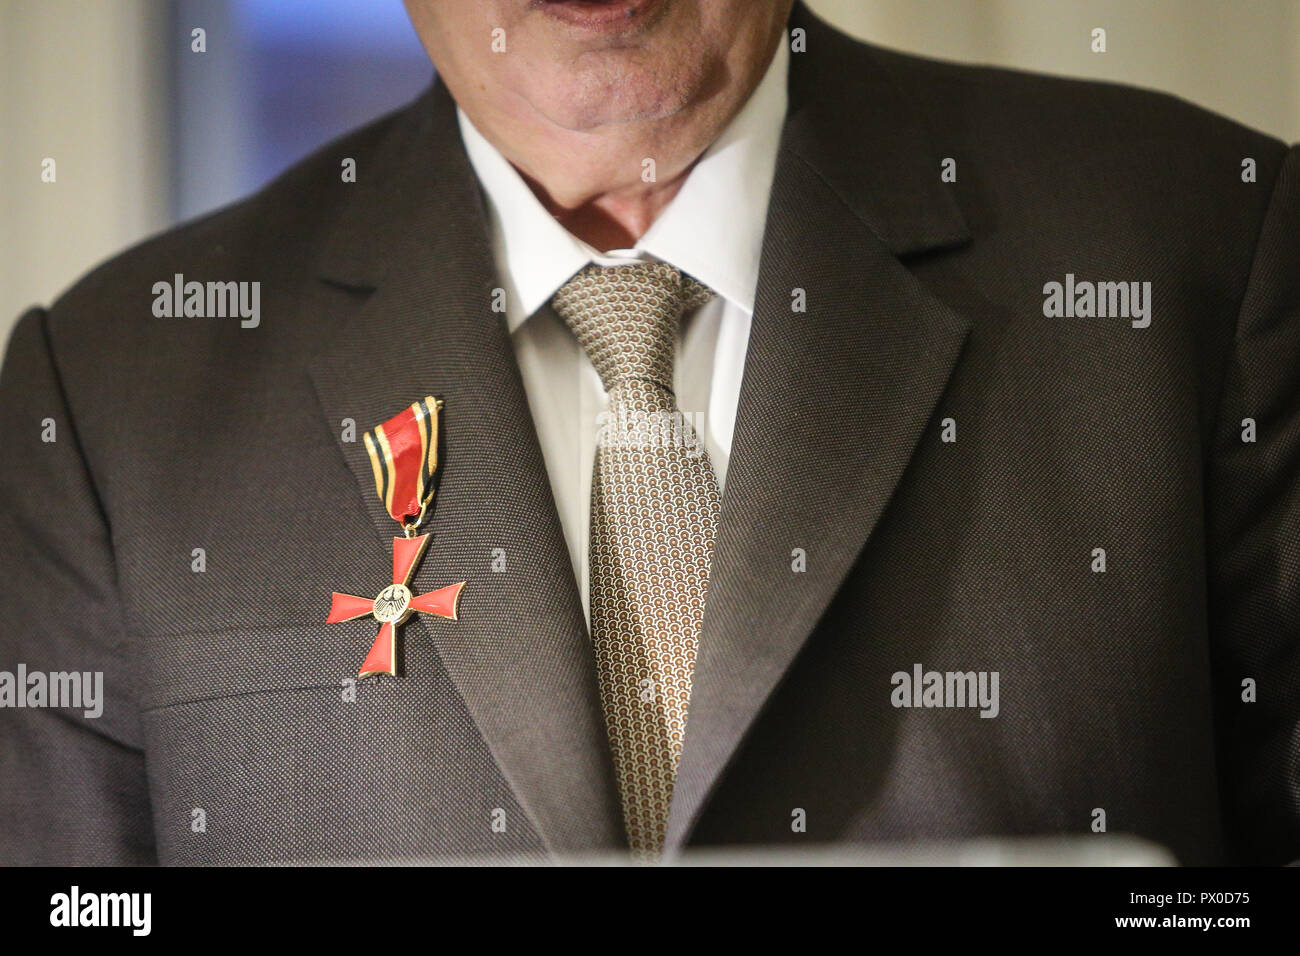 Details of a man holding a cross of Order of Merit of the Federal Republic of Germany during a speech Stock Photo